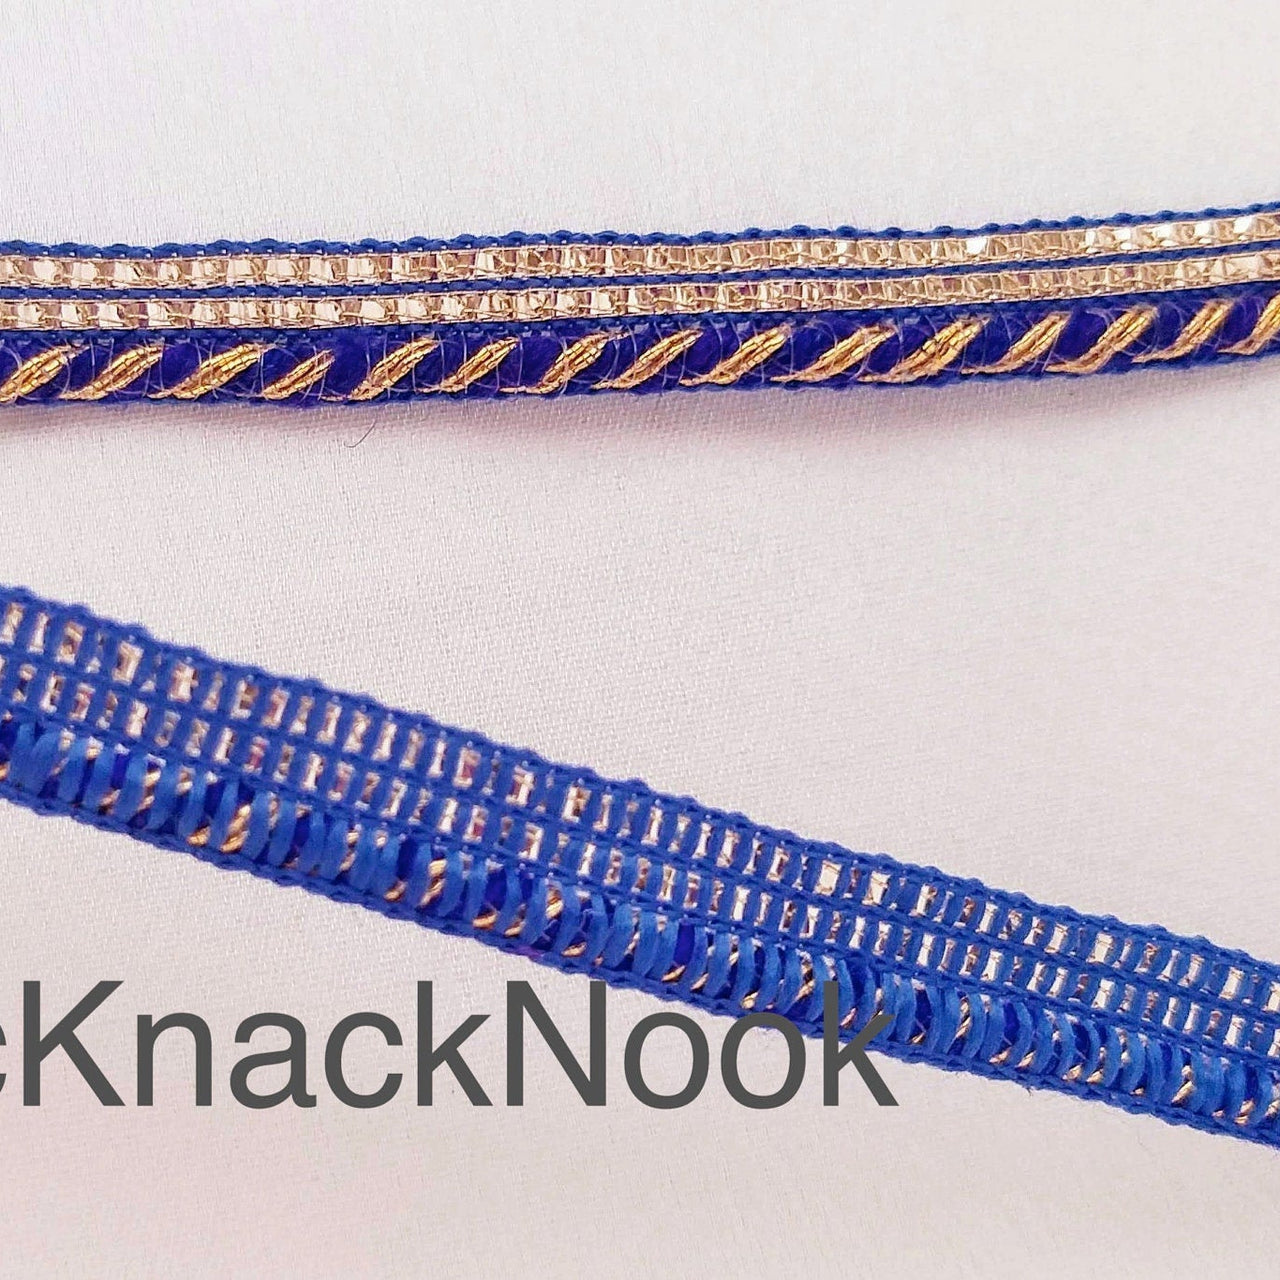 Royal Blue / Black And Gold Stripes Piping Cord trim With Glitter Gold Piping, Approx. 10 mm wide, One Yard Trim